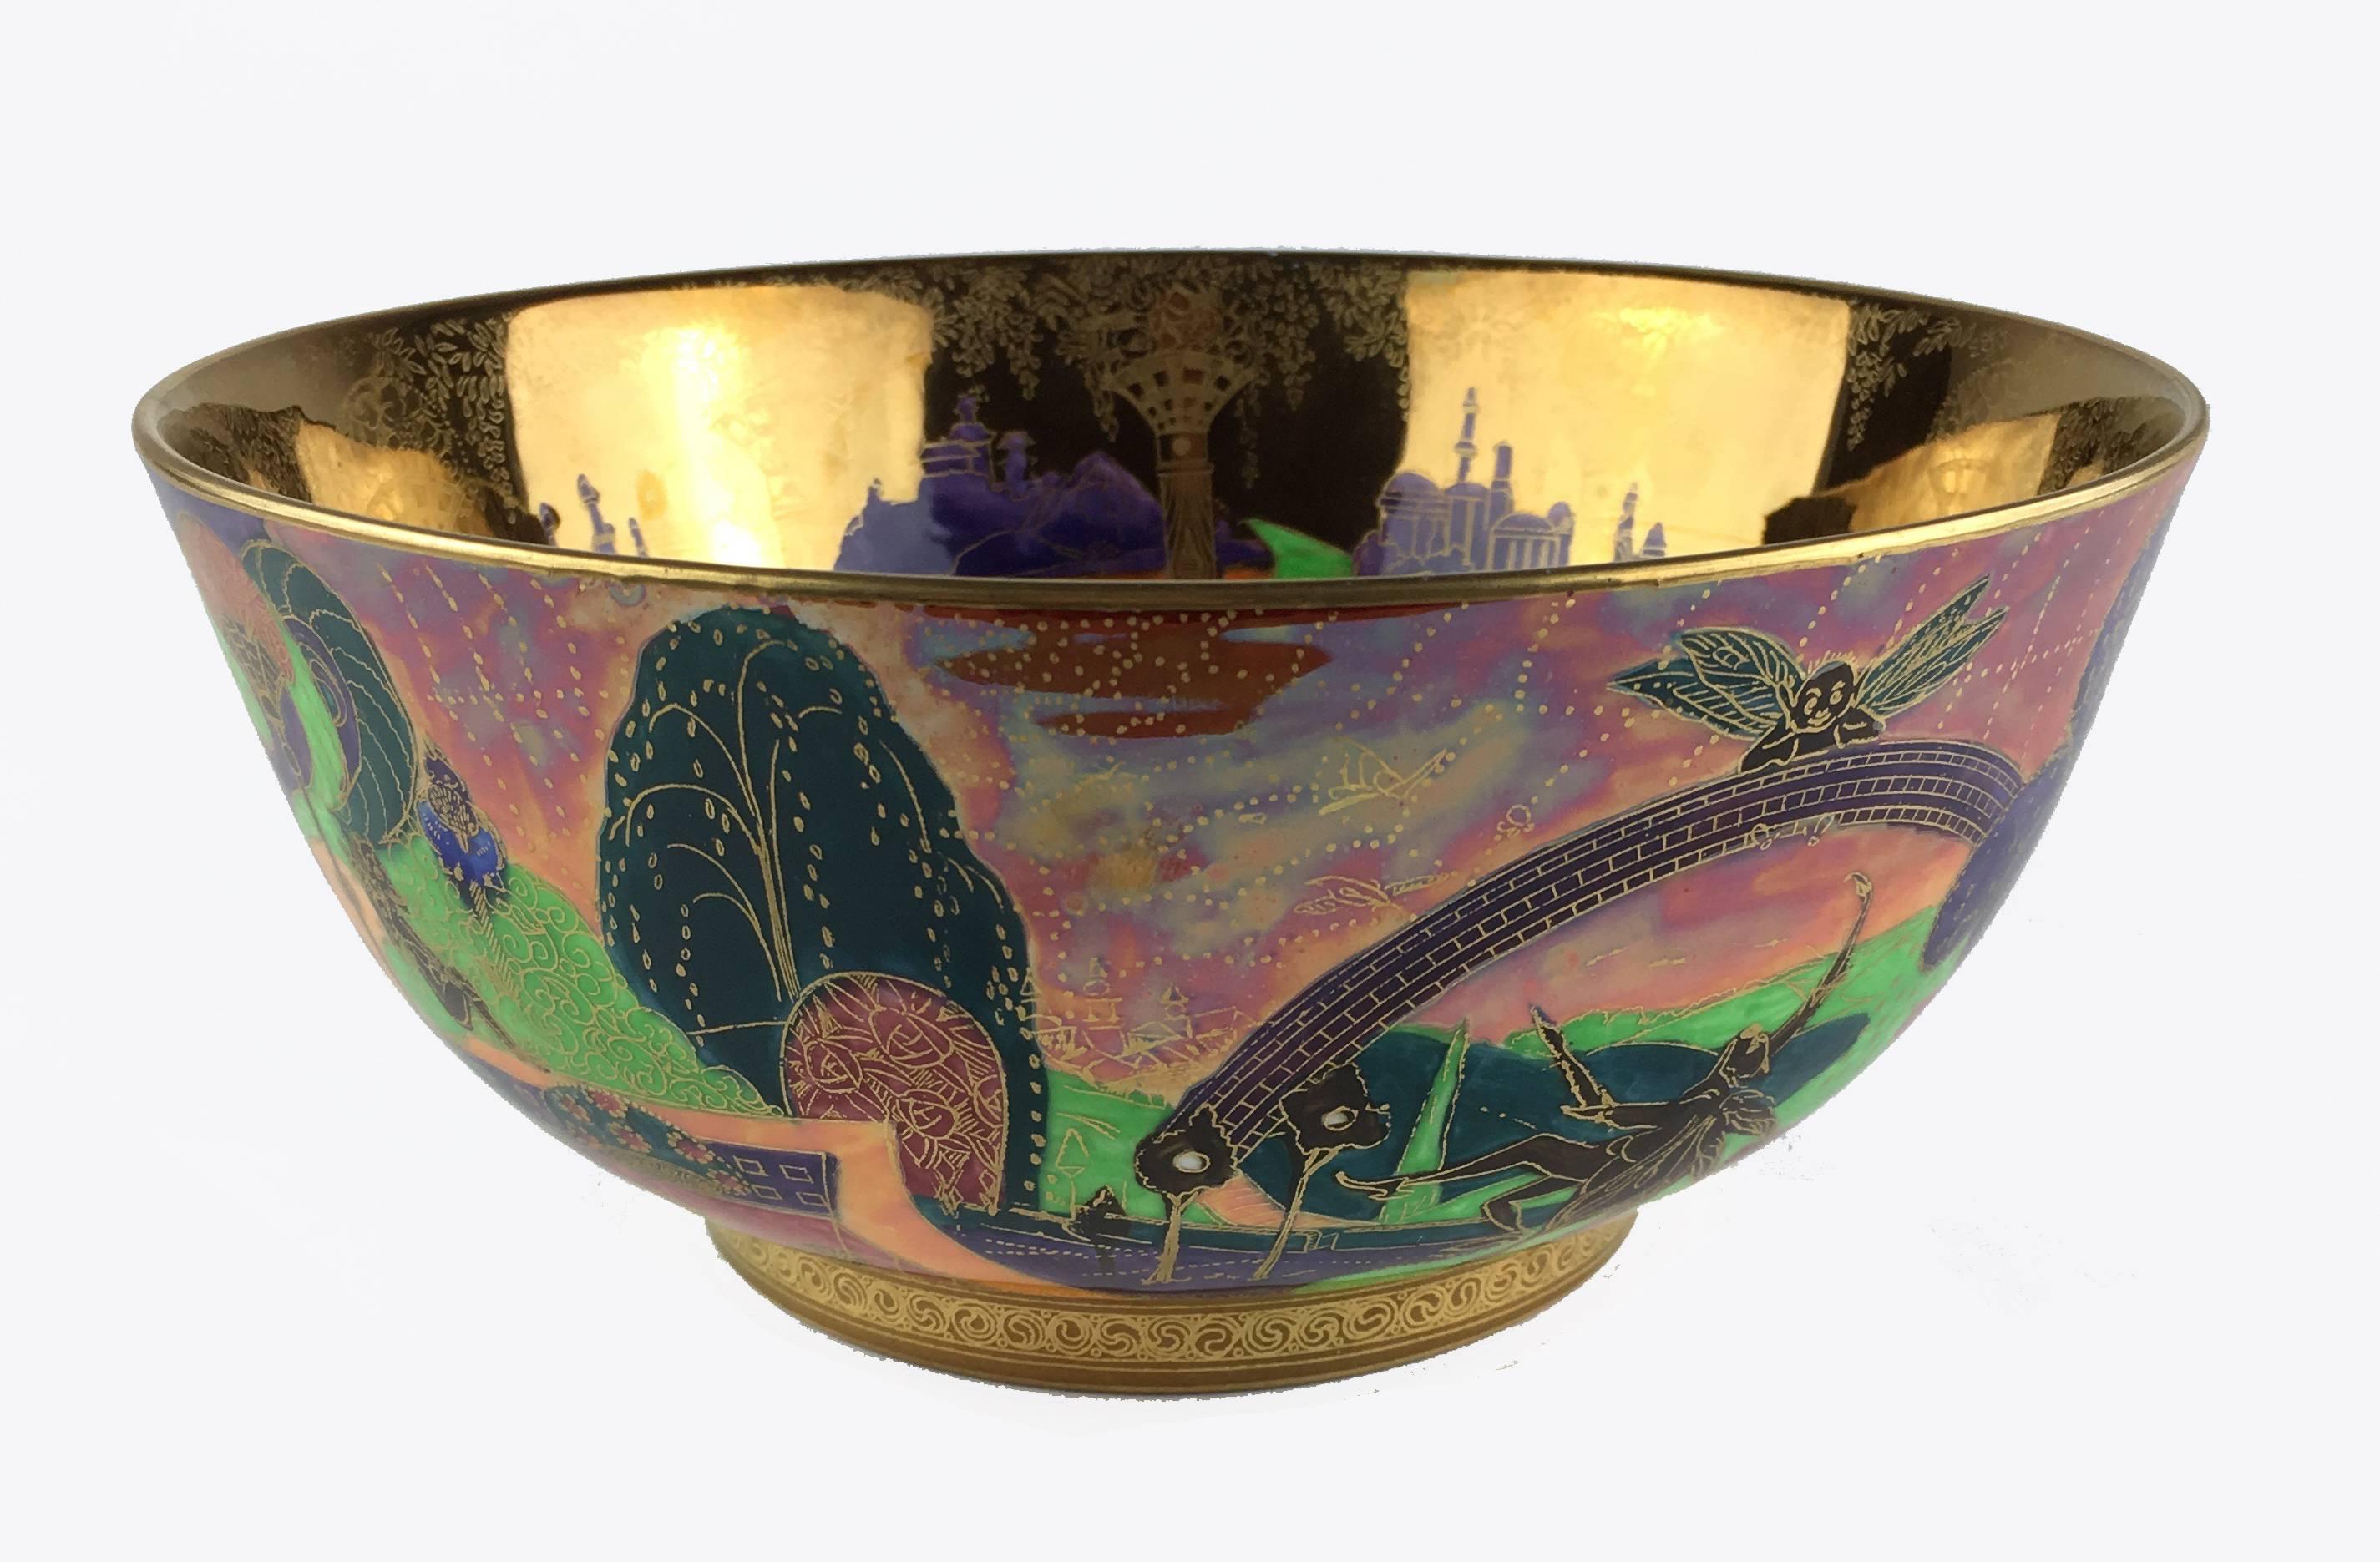 English wedgwood fairyland flame lustre porcelain Art Deco imperial-shape bowl designed by Daisy Makeig-Jones (1881-1945) and painted in the 